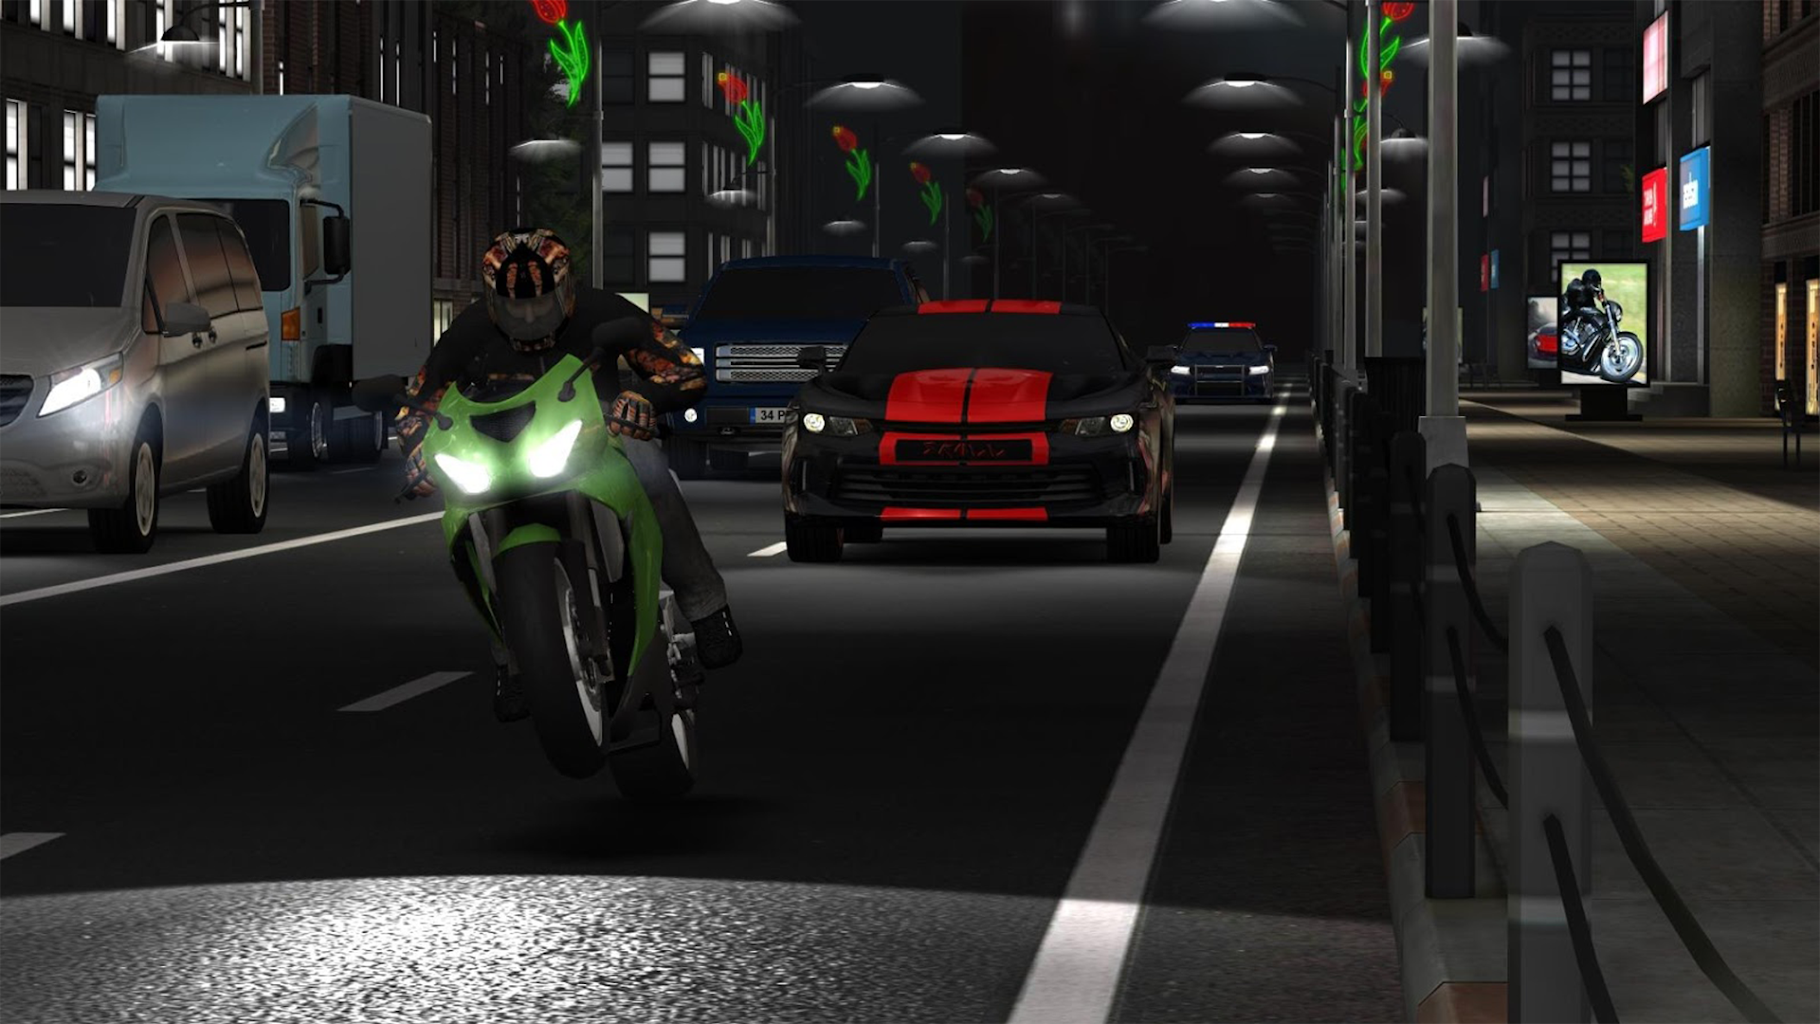 Racing Fever : Moto for apple download free